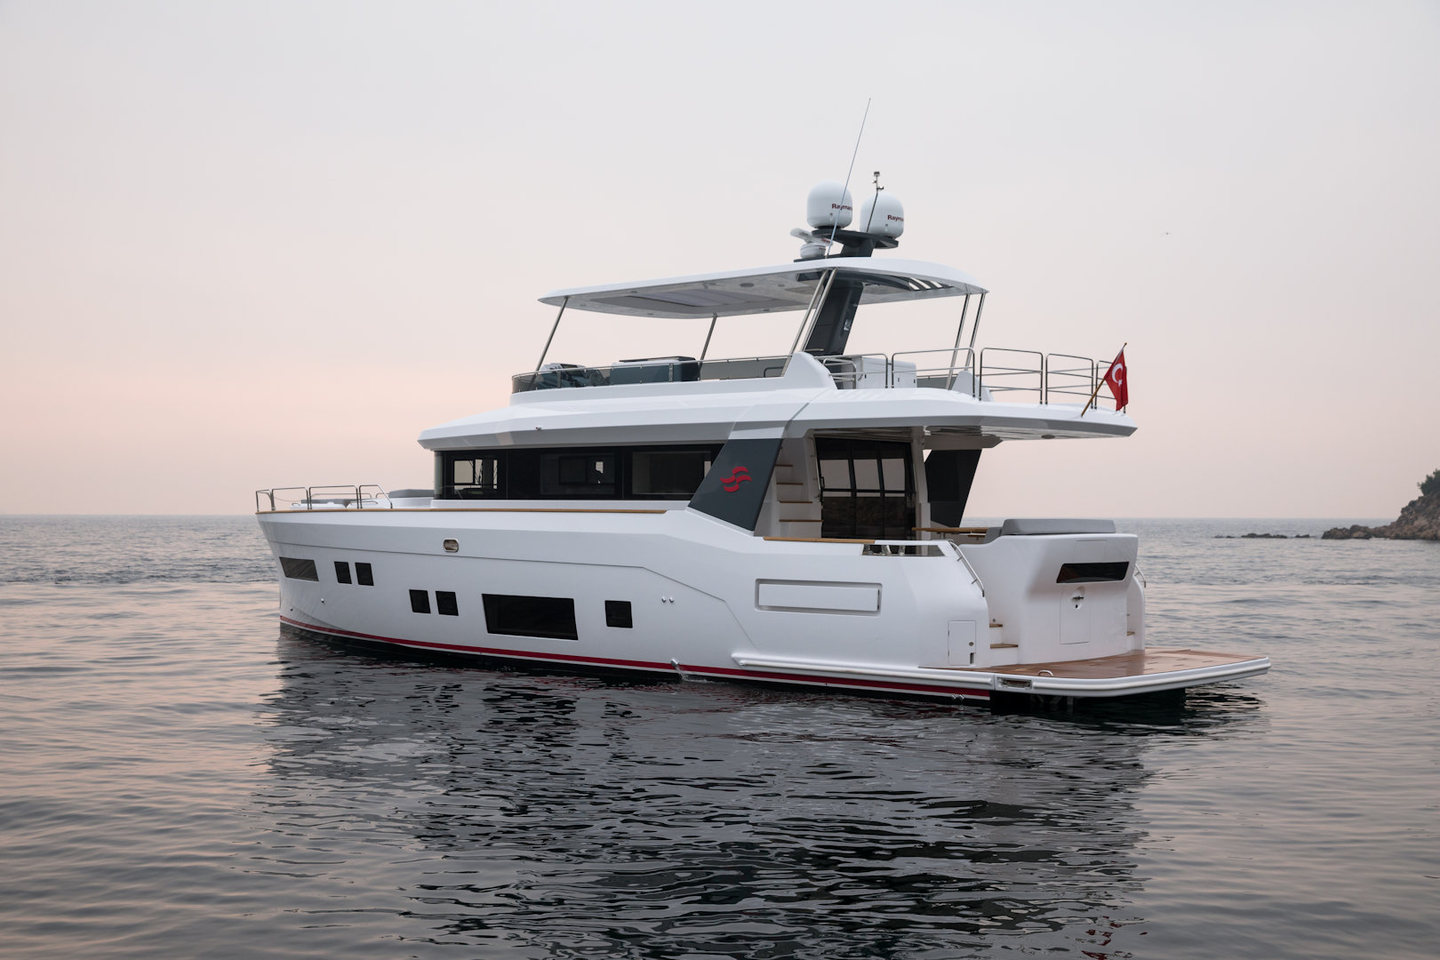 360 VR Virtual Tours of the Sirena 64